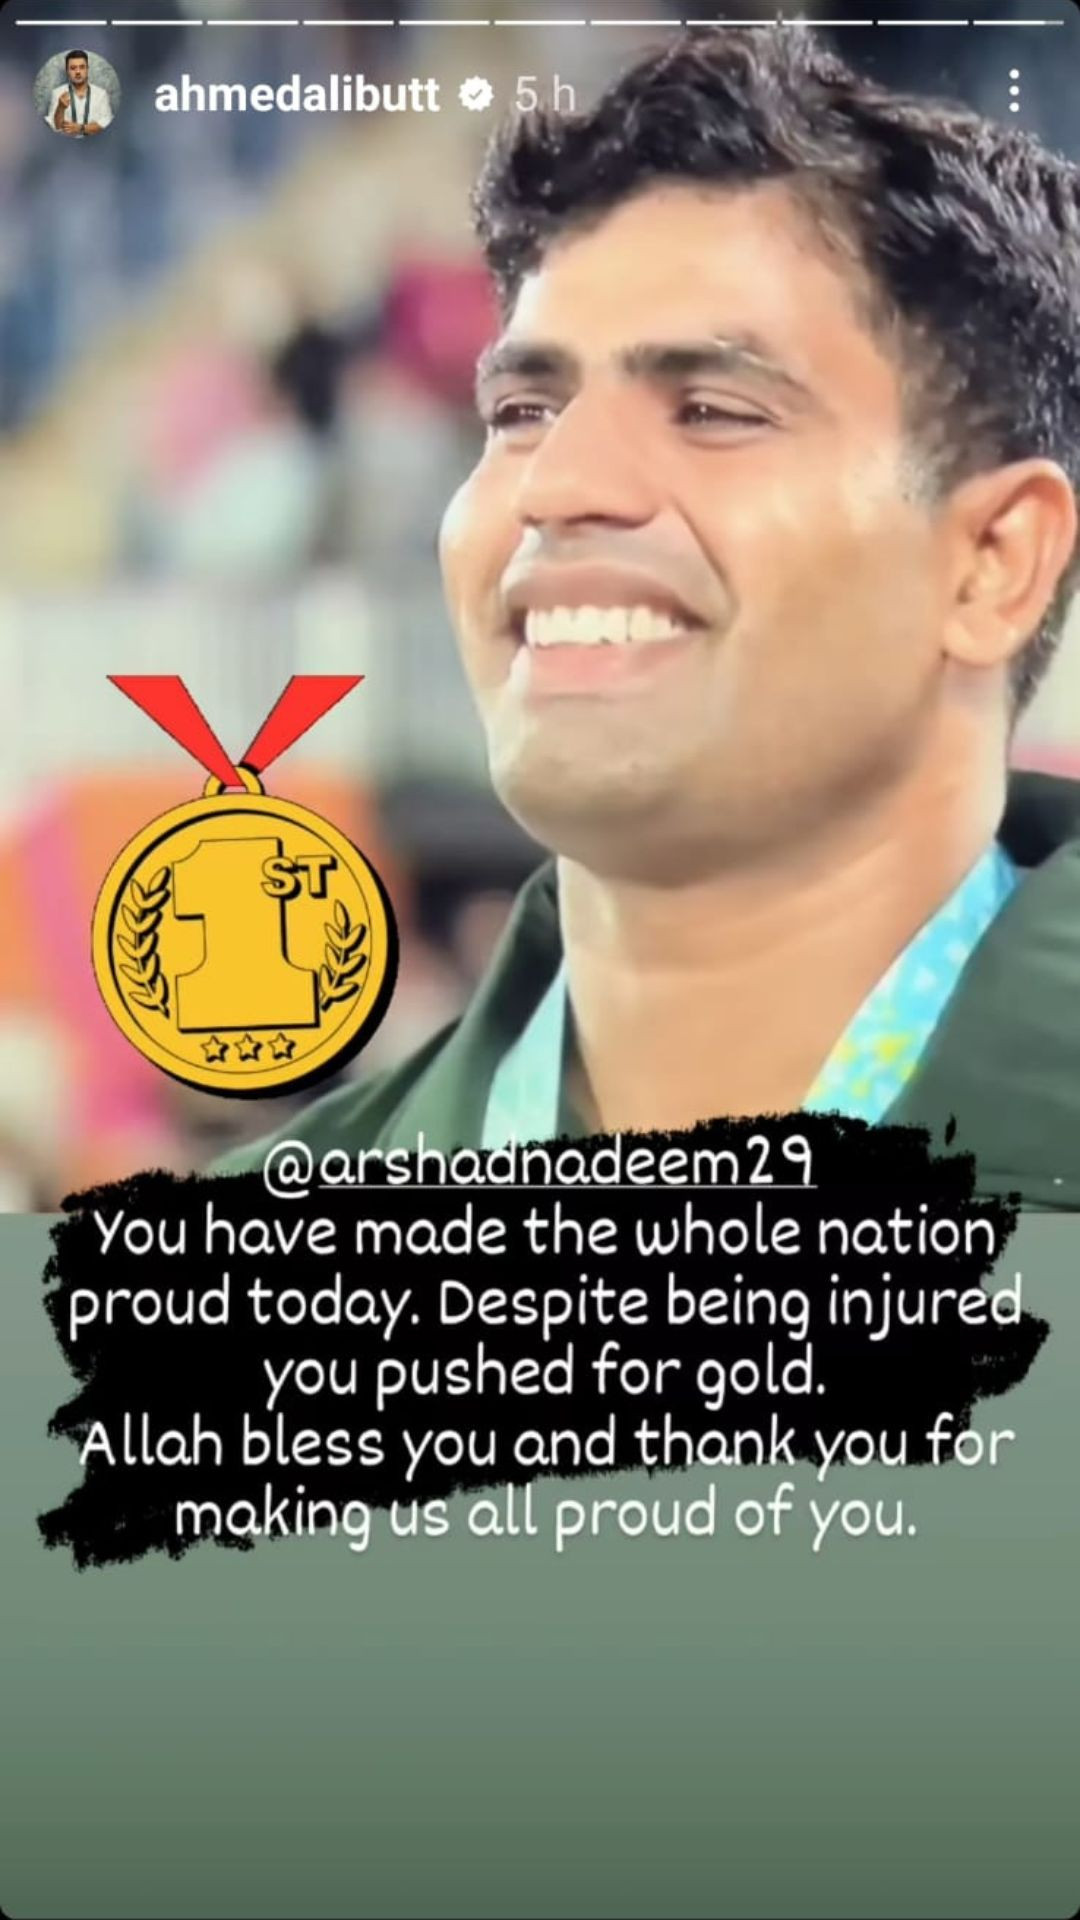 Celebrities laud Arshad Nadeem for victory at Commonwealth Games